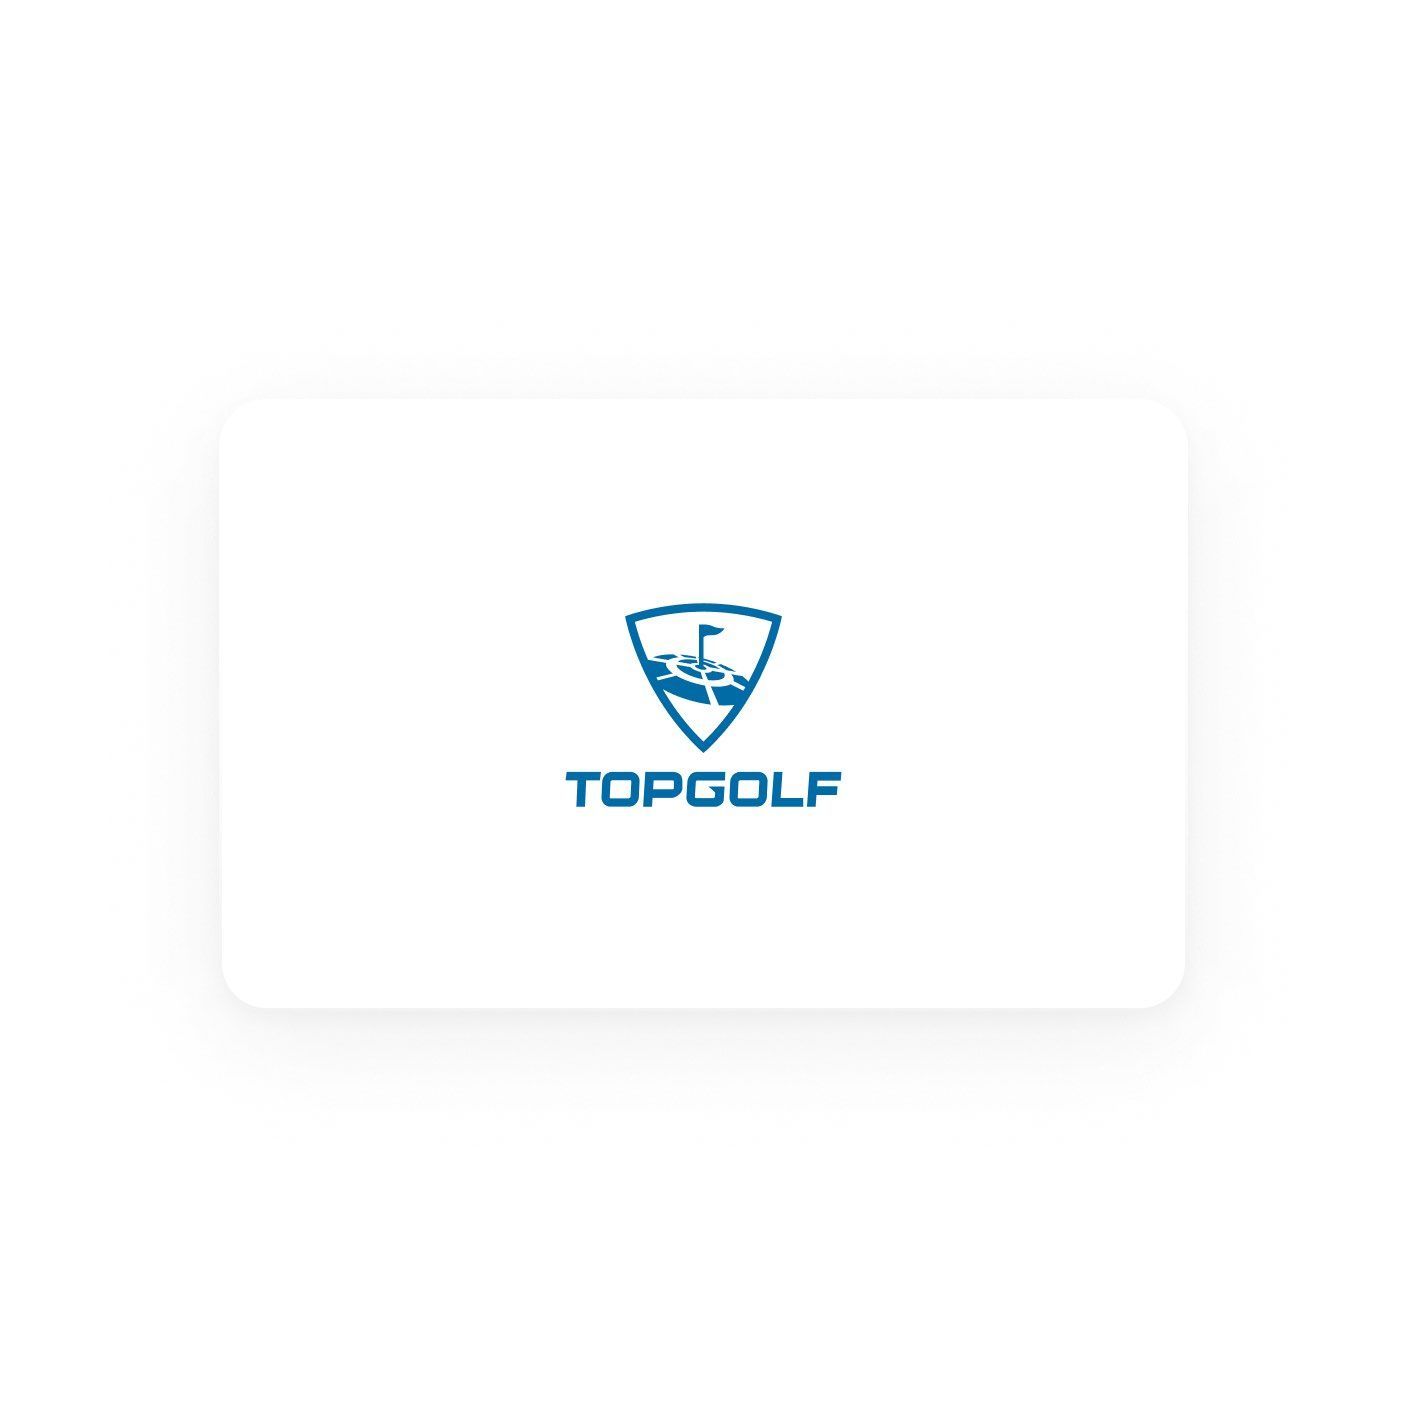 Topgolf Two $50 E-Gift Cards